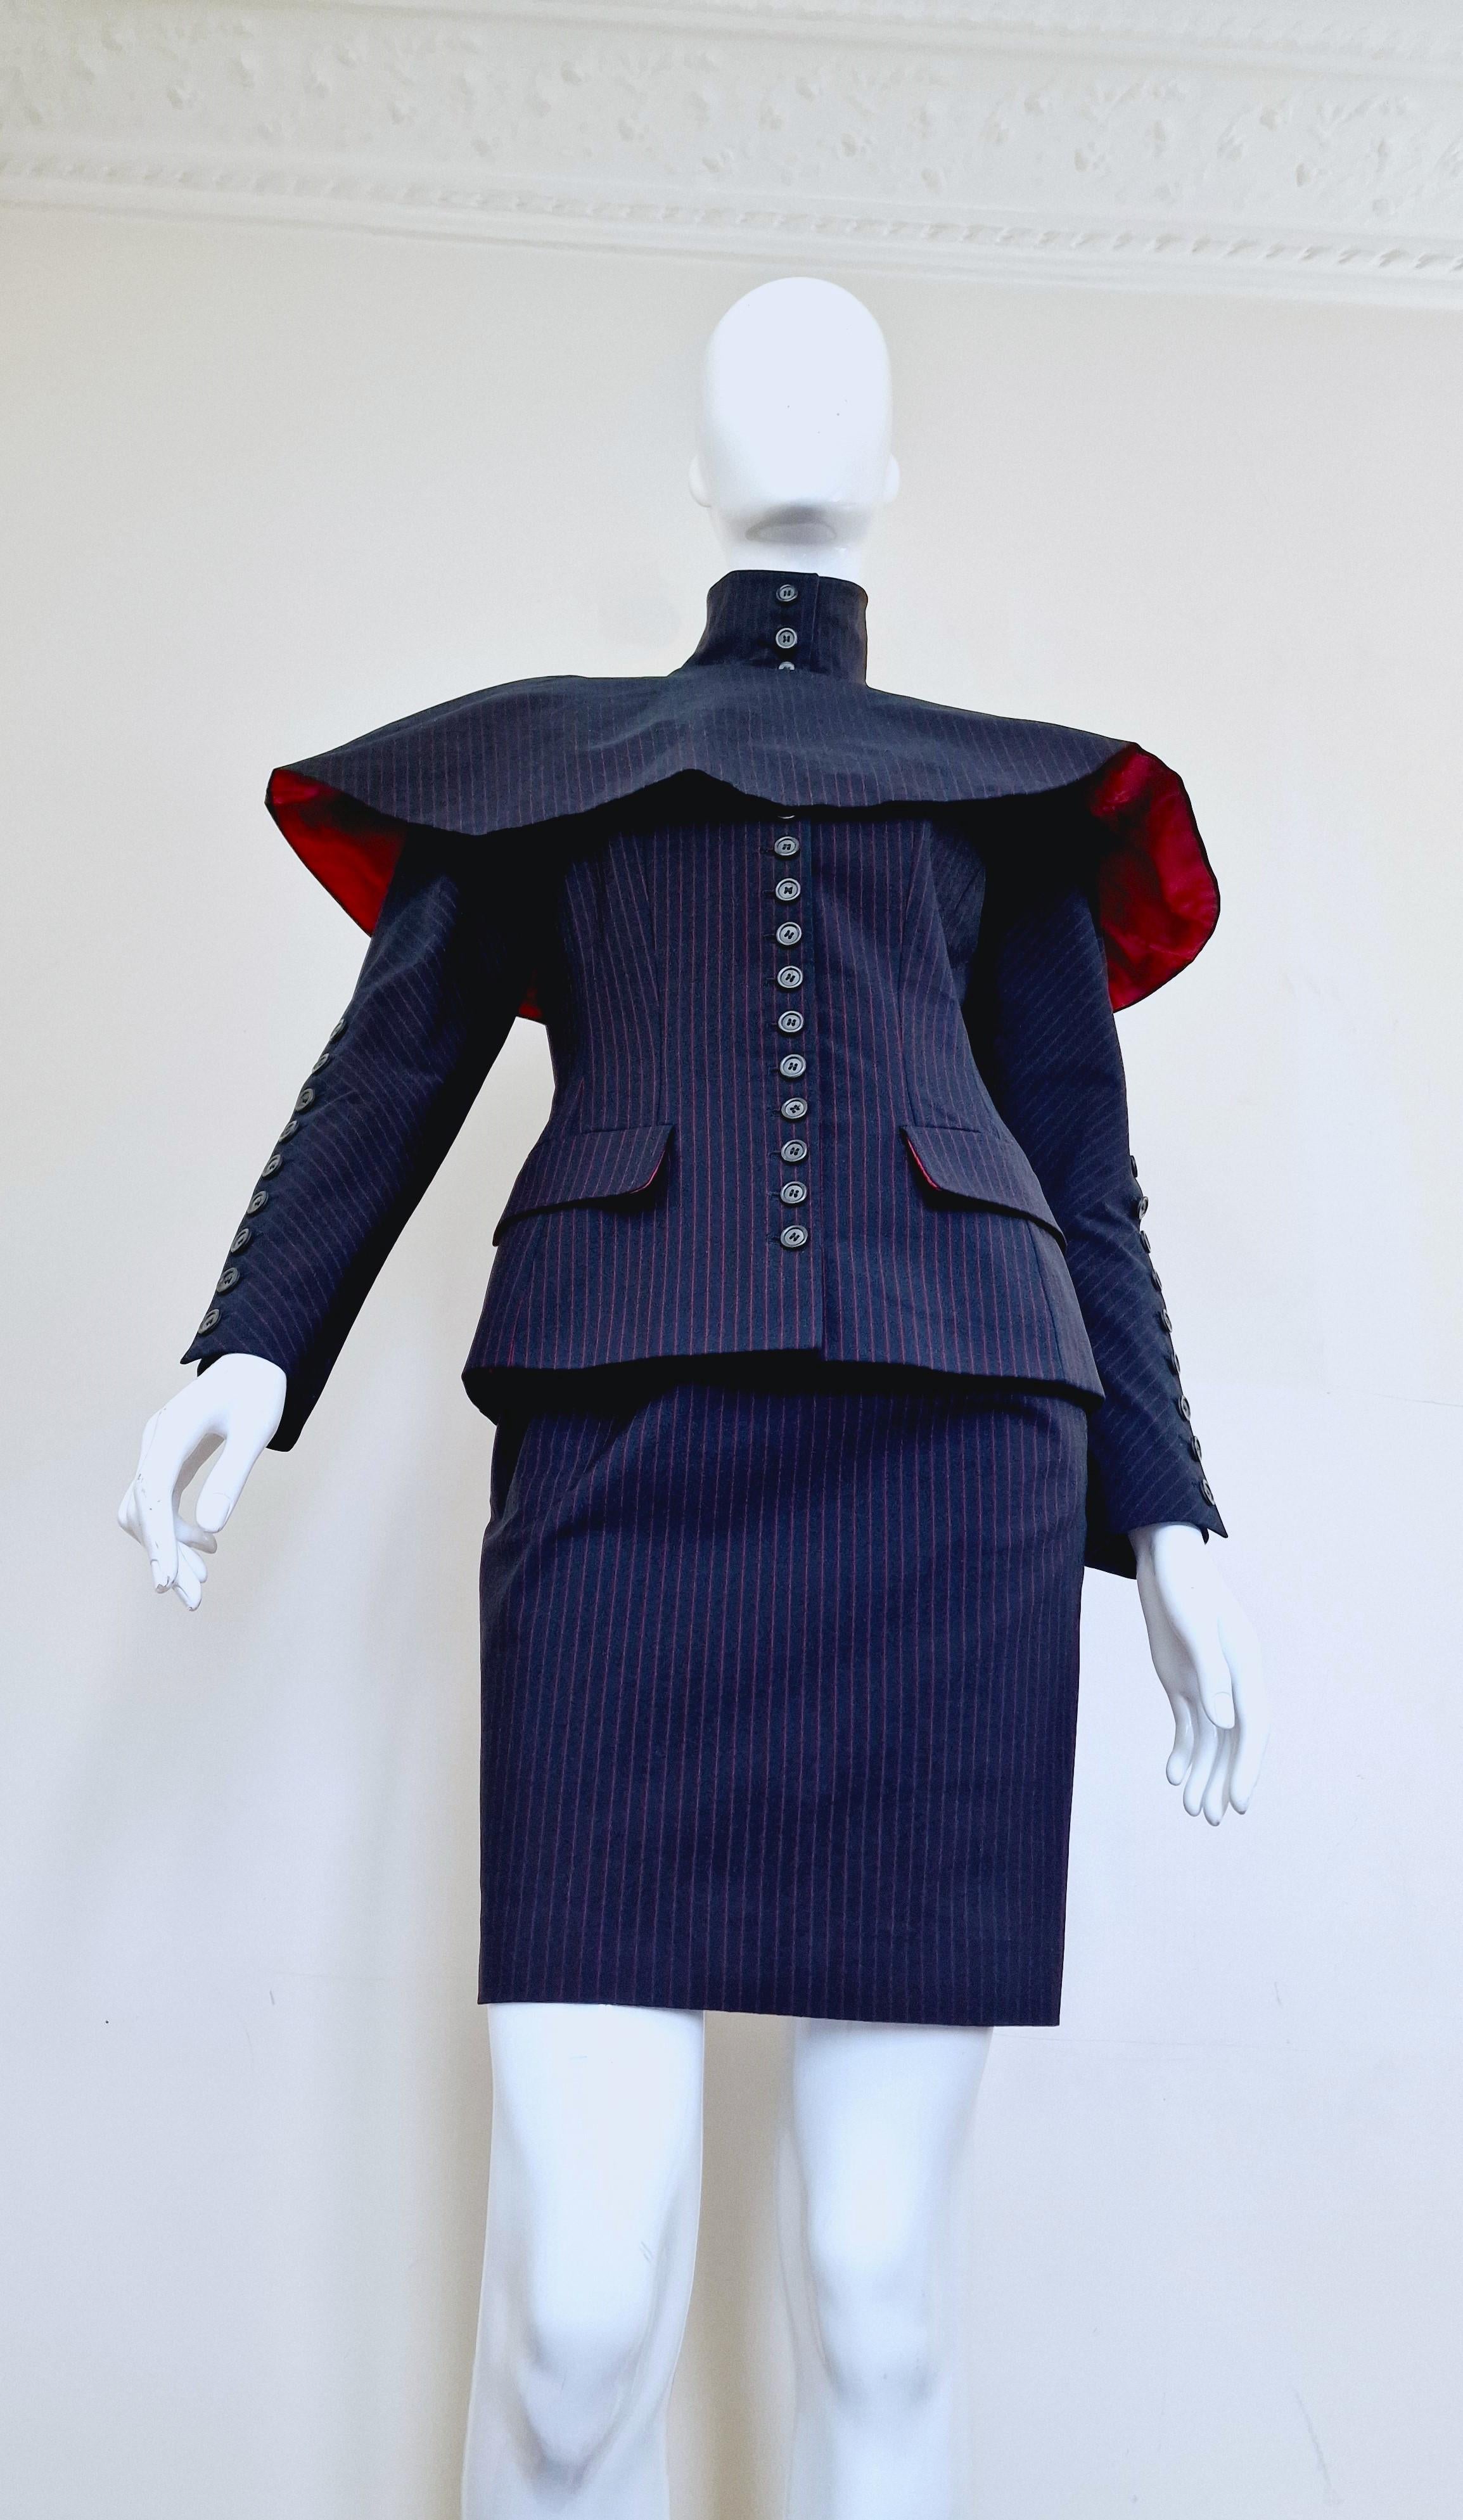 Early Alexander McQueen Joan of Arc Cape 1998 AW98 Runway Collar Dress Suit  For Sale 3